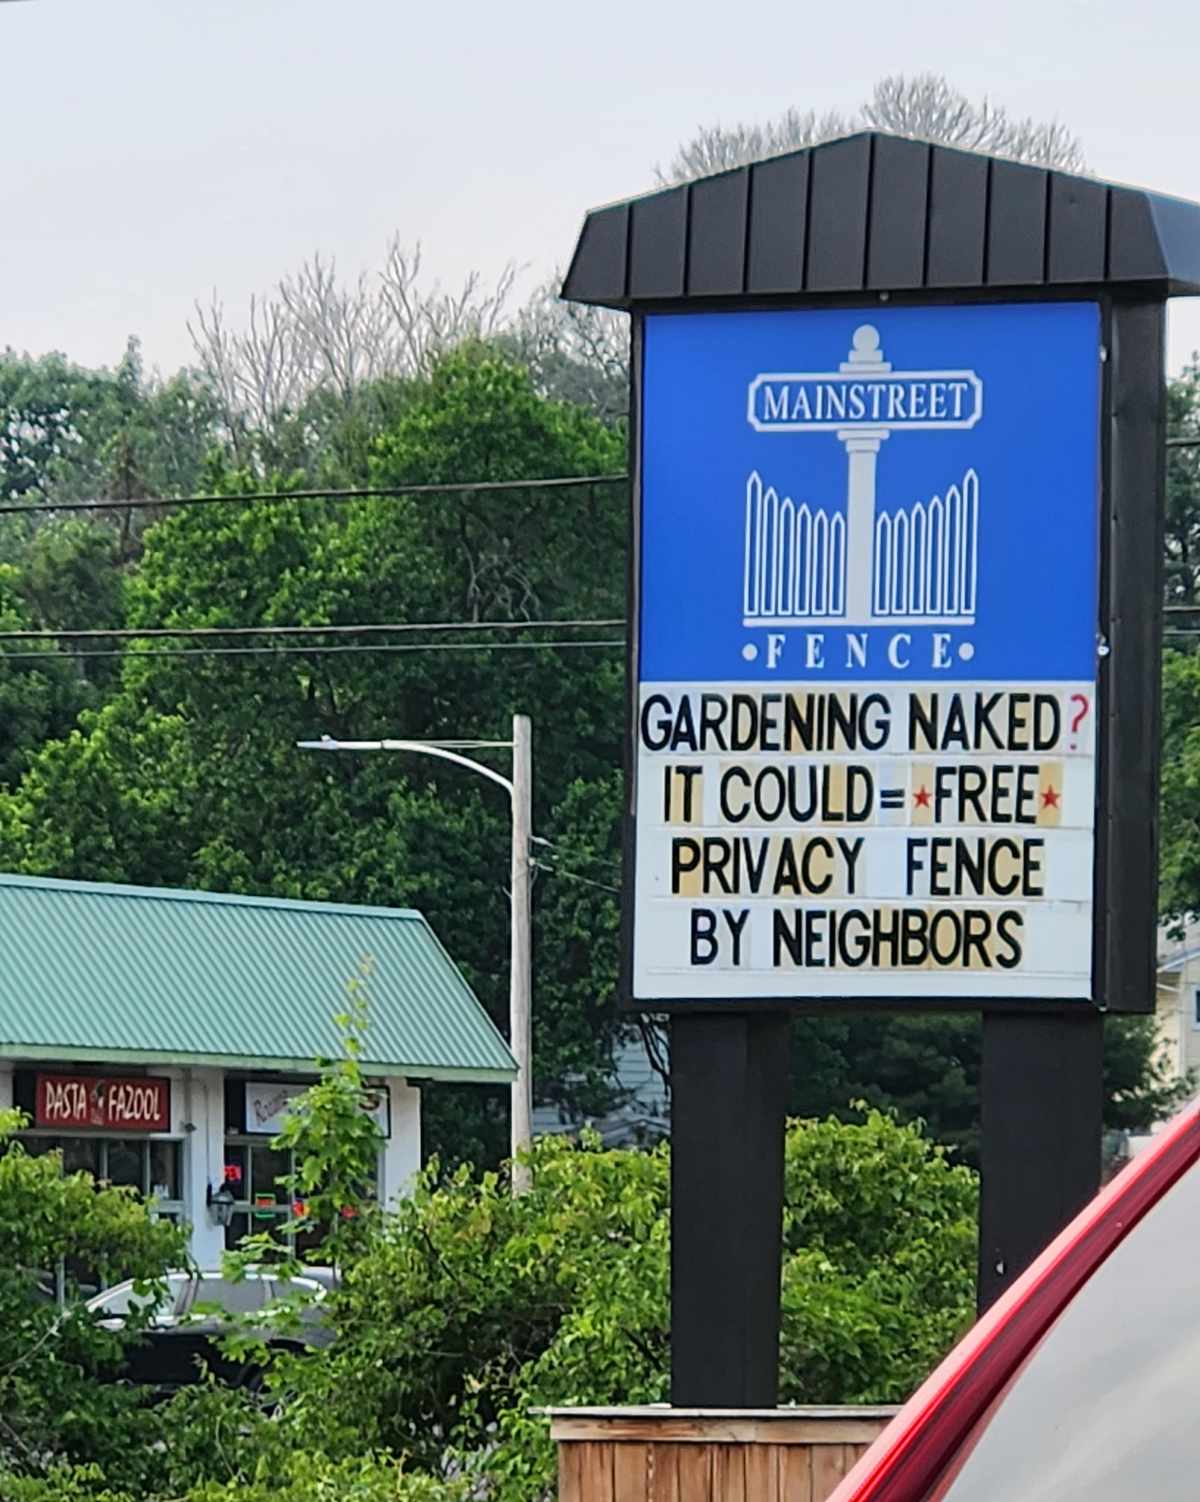 Our local fence company...